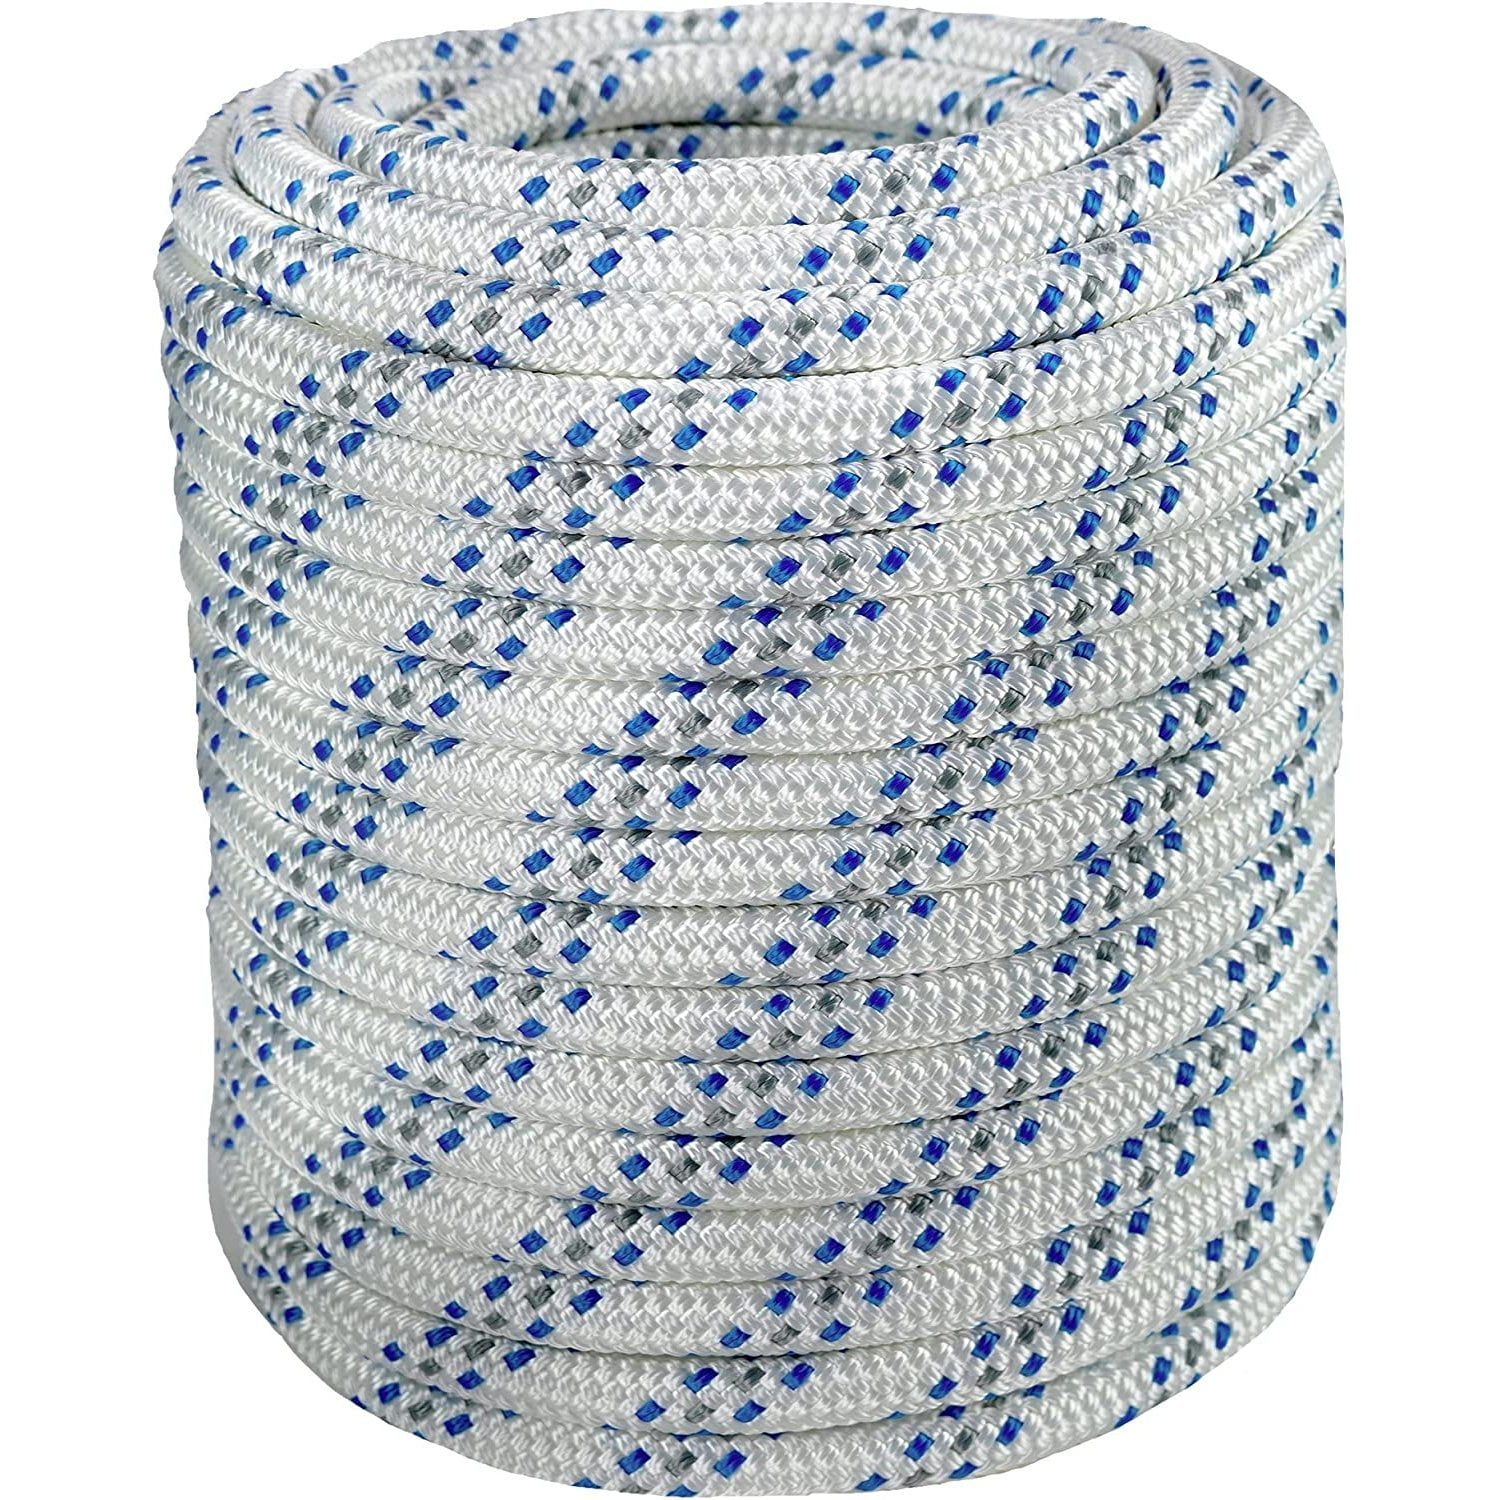 Double Braid Polyester Arborist Bull Rope | Made in USA | Rigging Hoisting  Line | High Strength Tree Rope | 1/2 inch x 100 feet, no Eye Splice